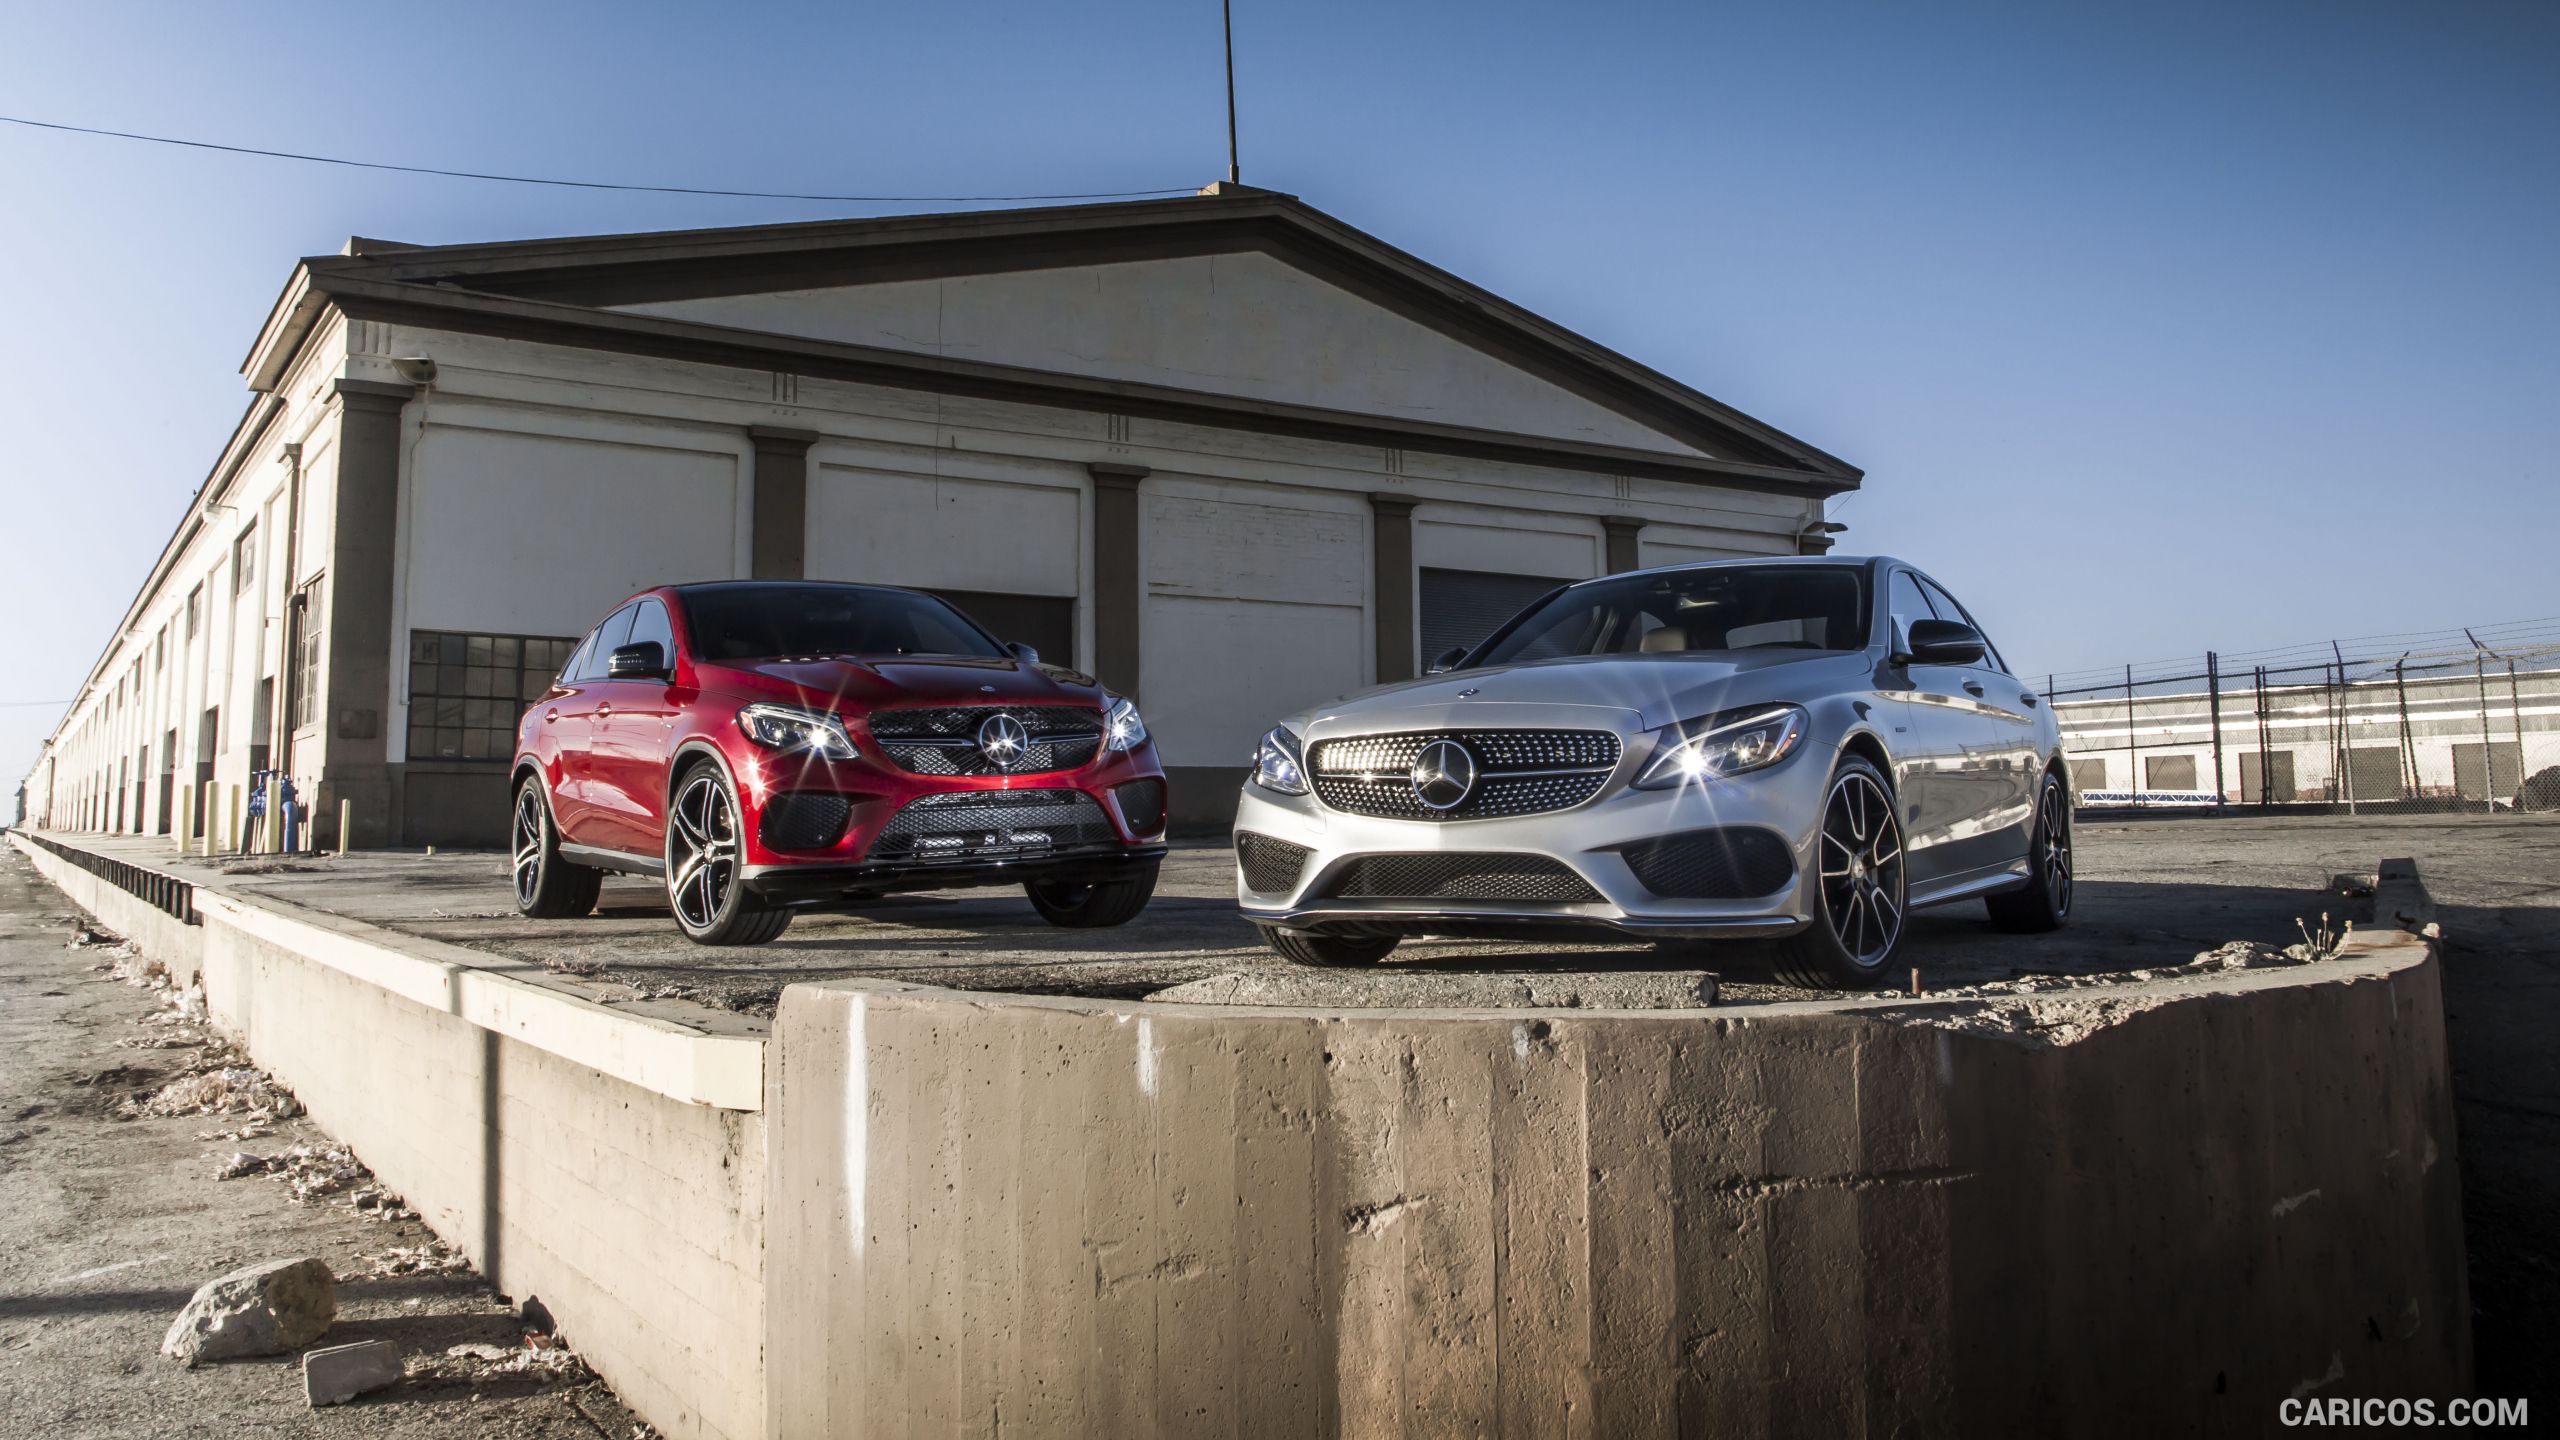 2016 Mercedes-Benz C450 AMG Sedan (US-Spec) and Mercedes-Benz GLE 450 AMG Coupe - Front, #49 of 122